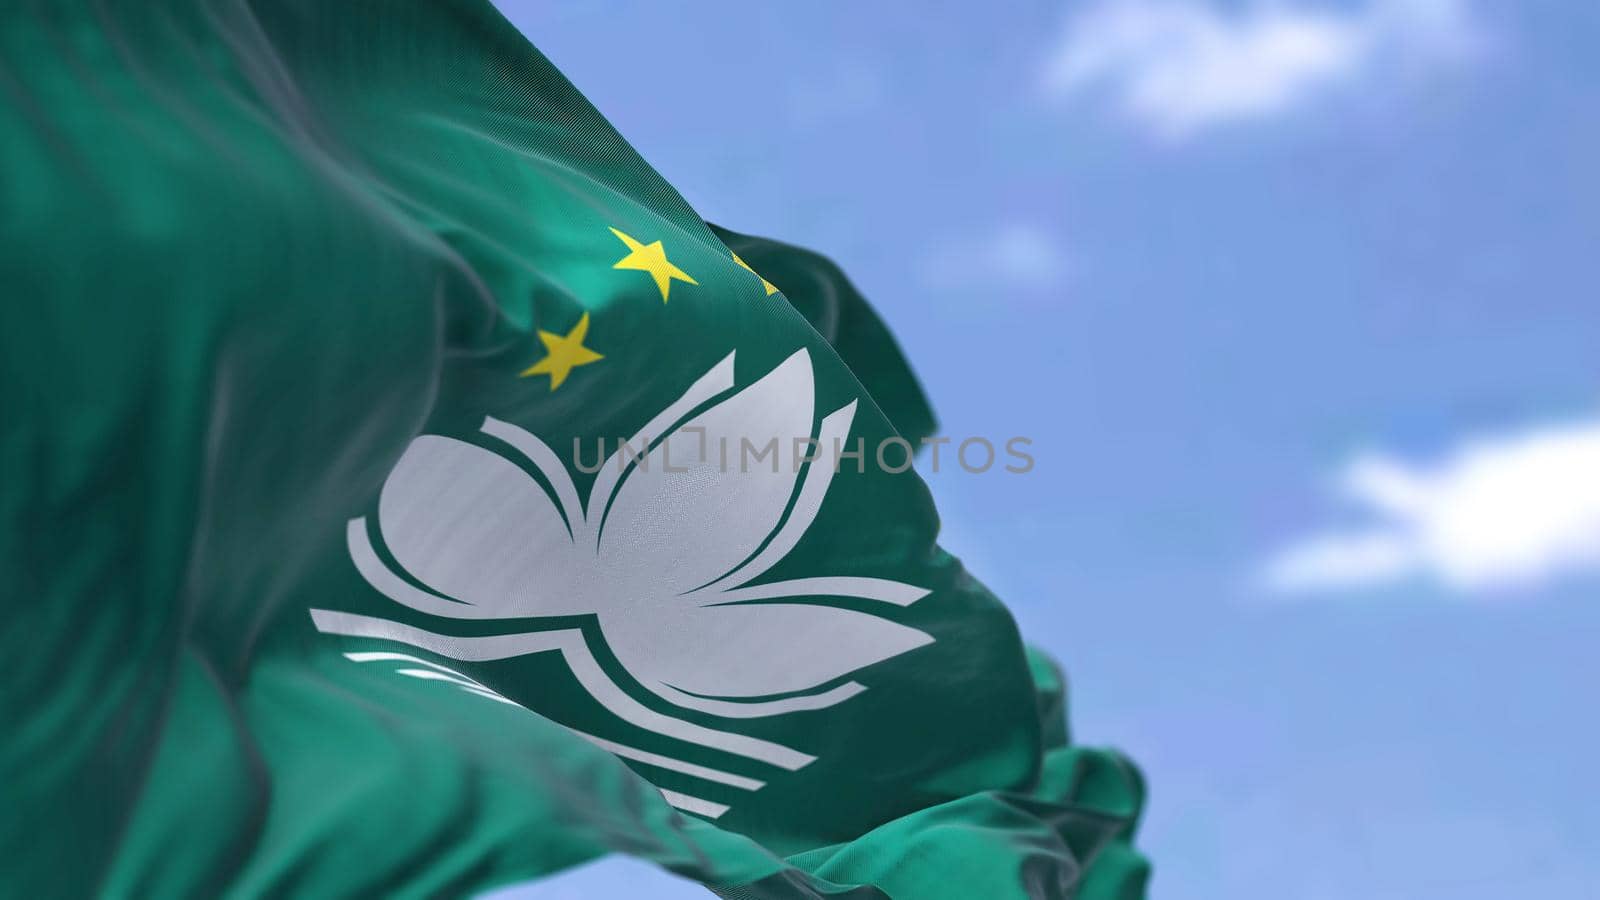 The flag of Macau waving in the wind on a clear day by rarrarorro